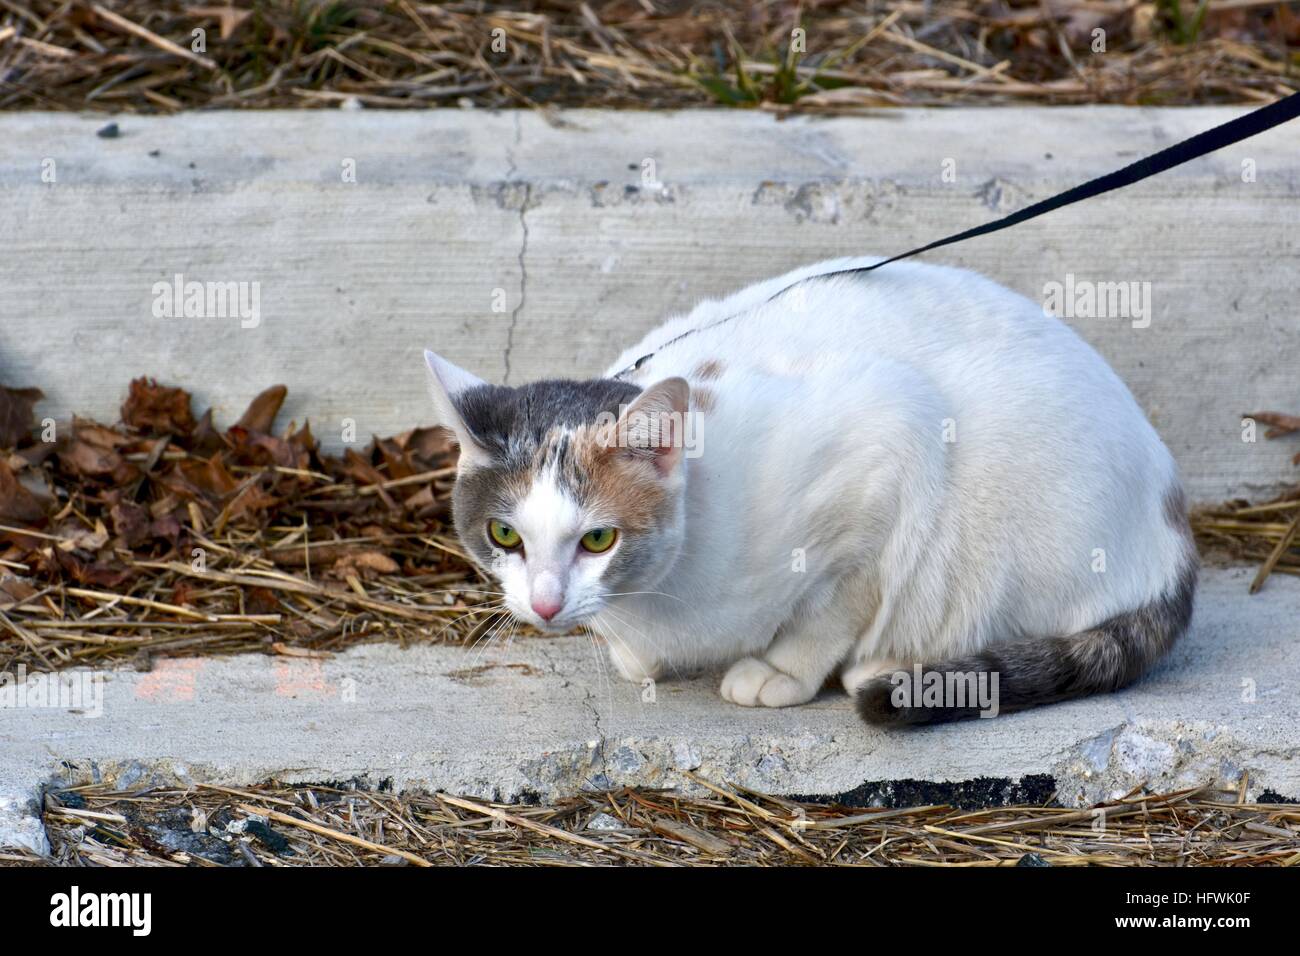 A beautiful calico cat on a leash while taking a walk with her owner Stock Photo